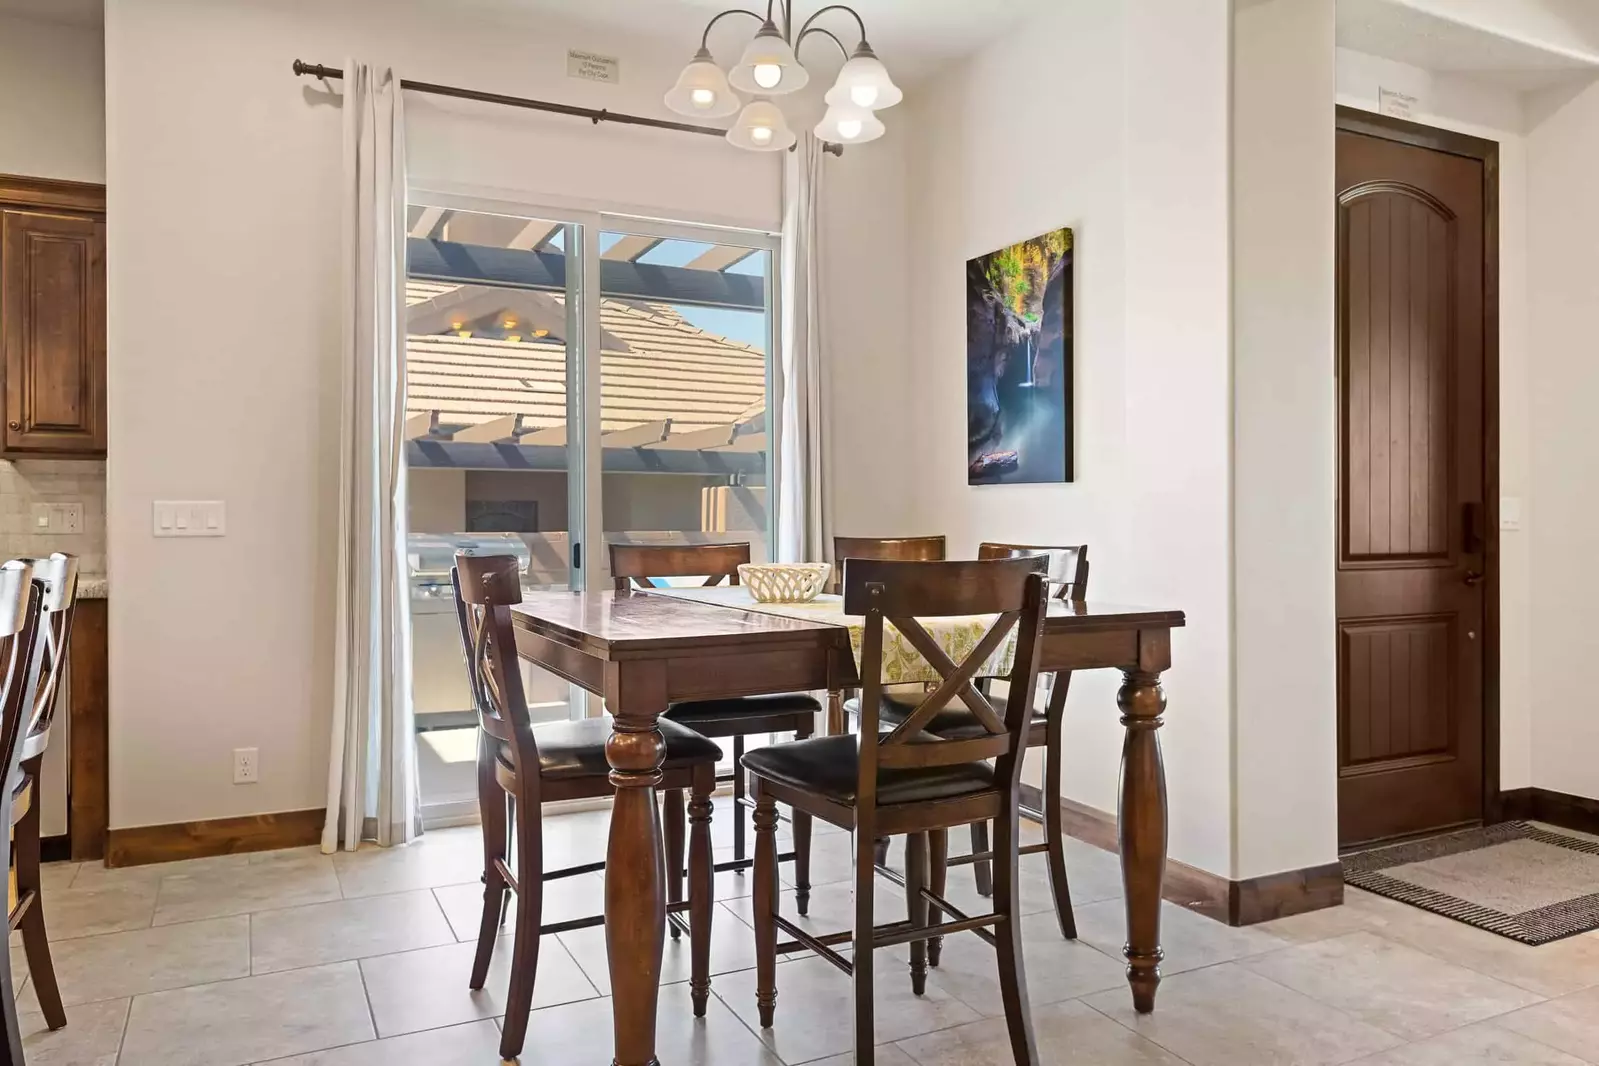 Dining area with seating for 4